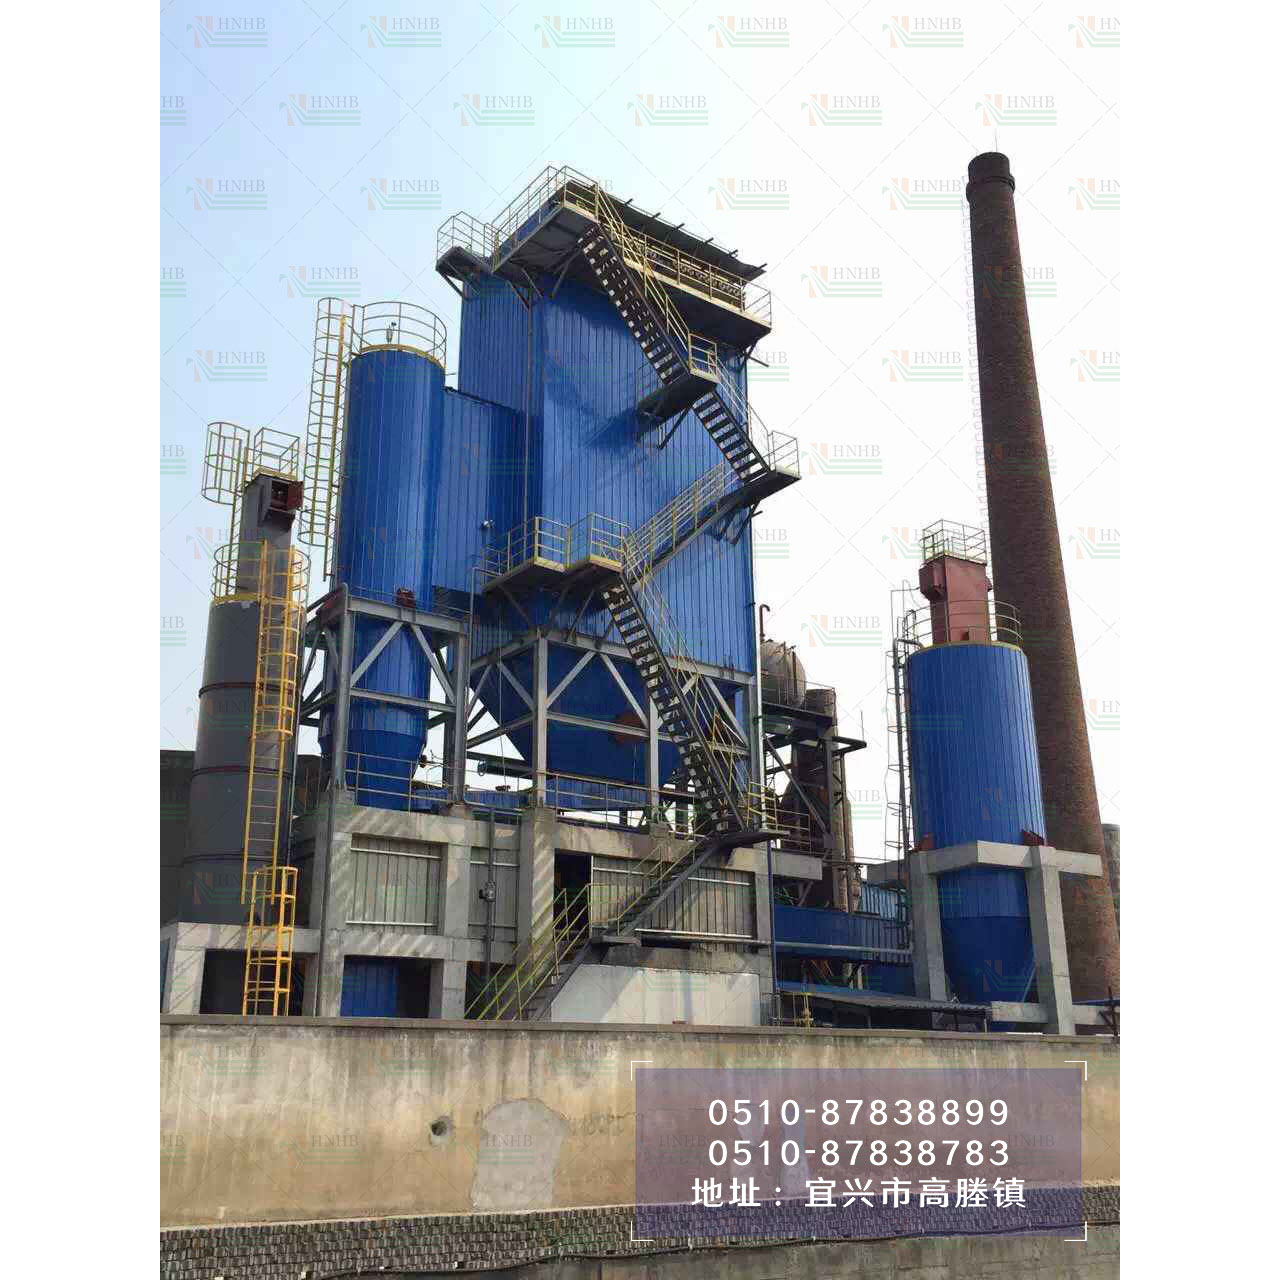 Henan-all oxygen glass kiln dust removal and desulfurization project